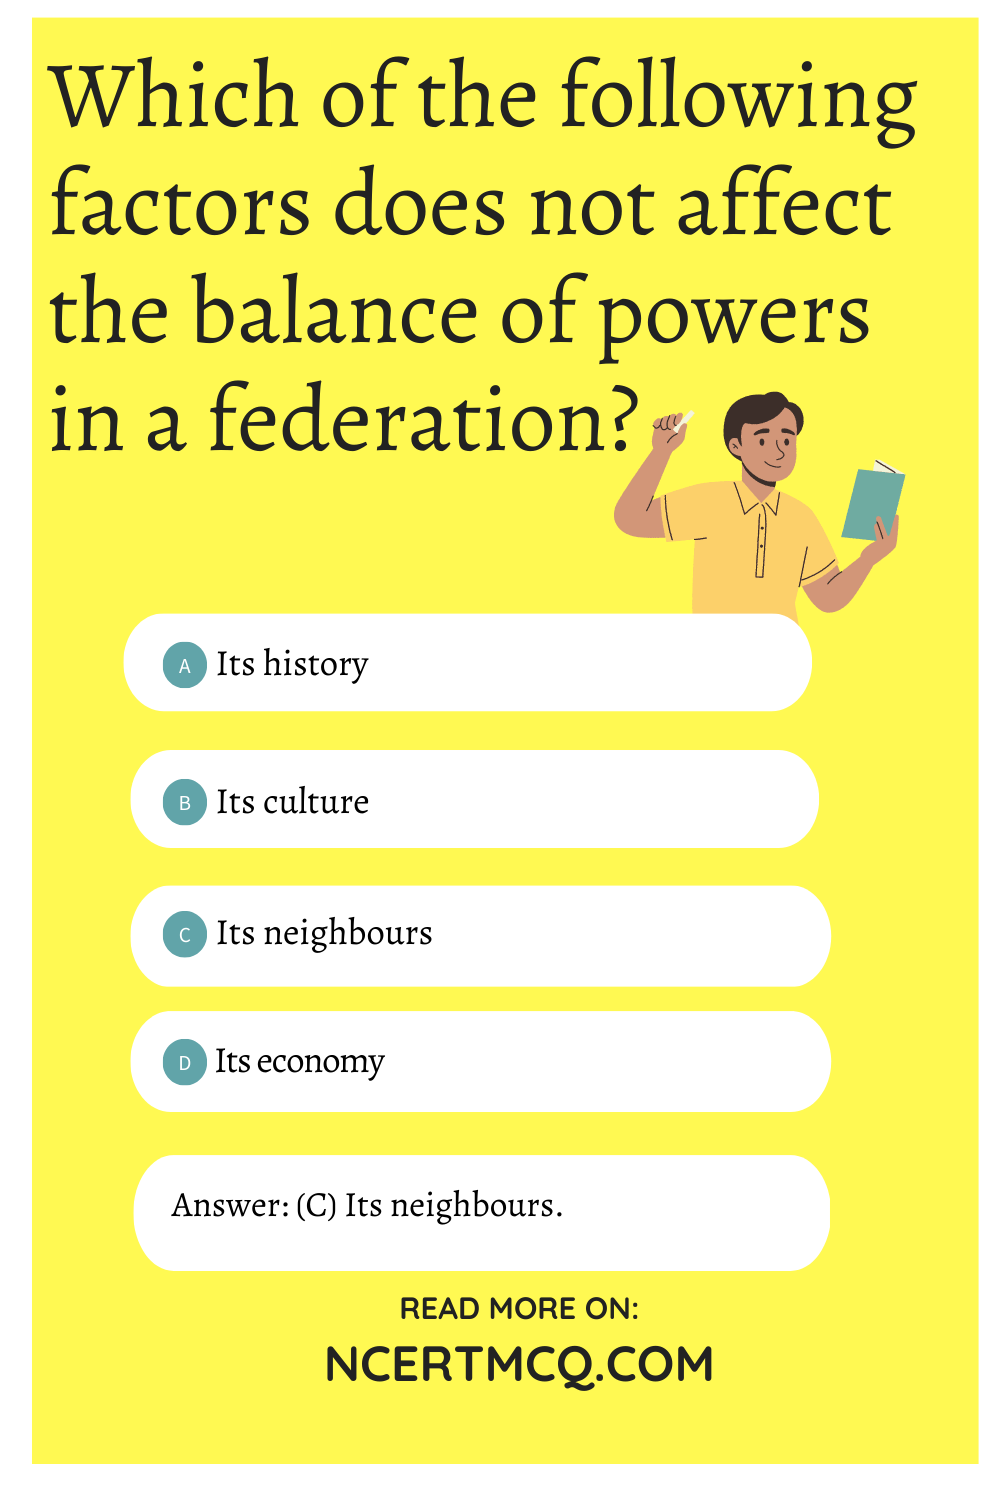 Which of the following factors does not affect the balance of powers in a federation?